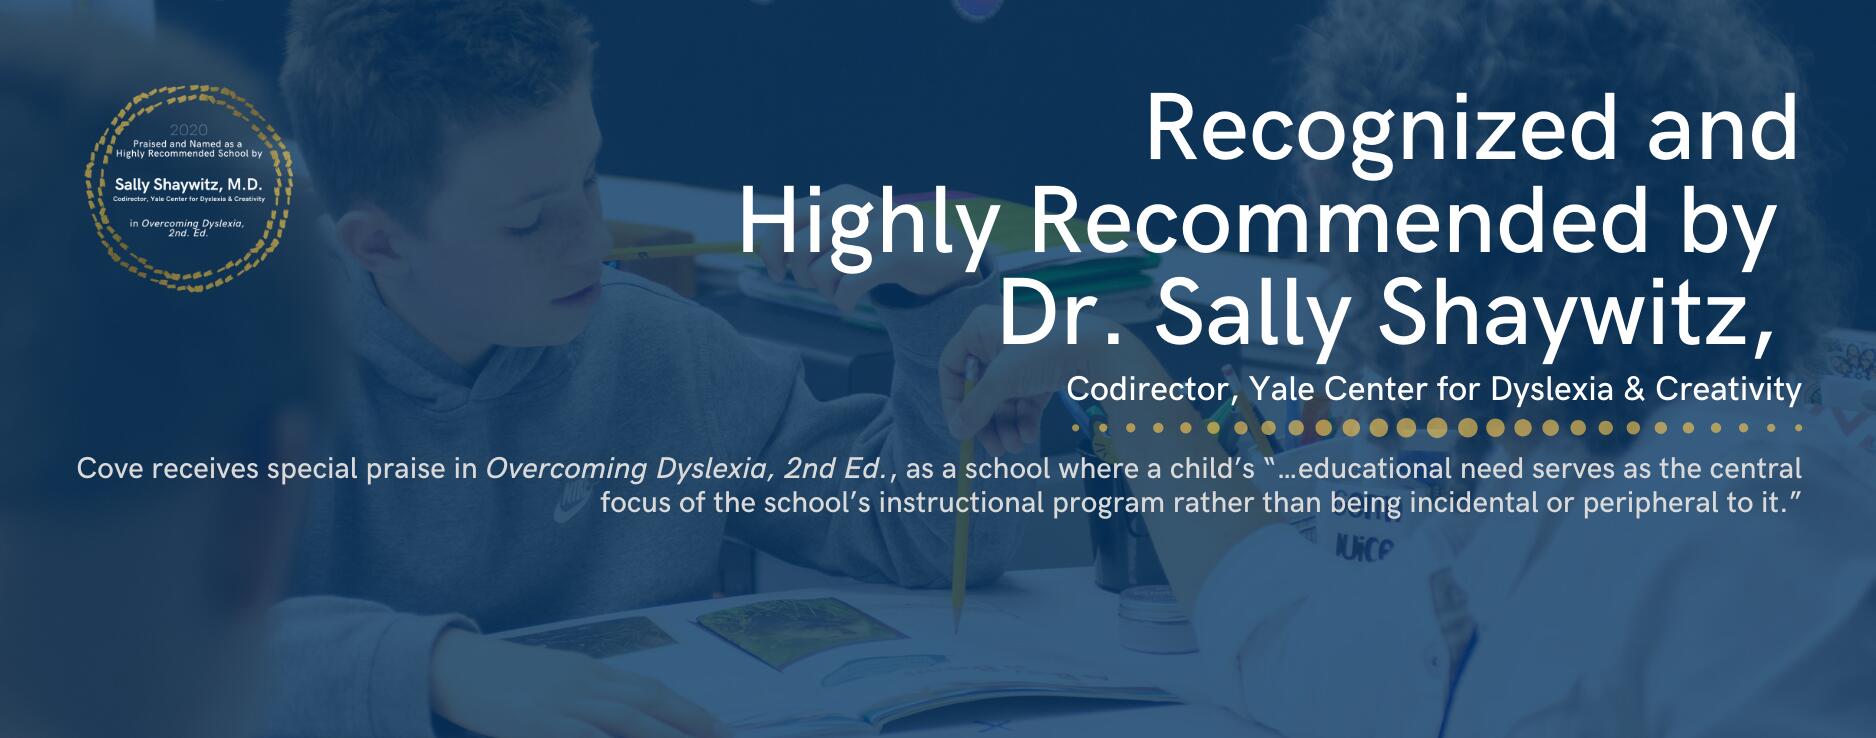 Cove receives special praise in Overcoming Dyslexia, 2nd Ed